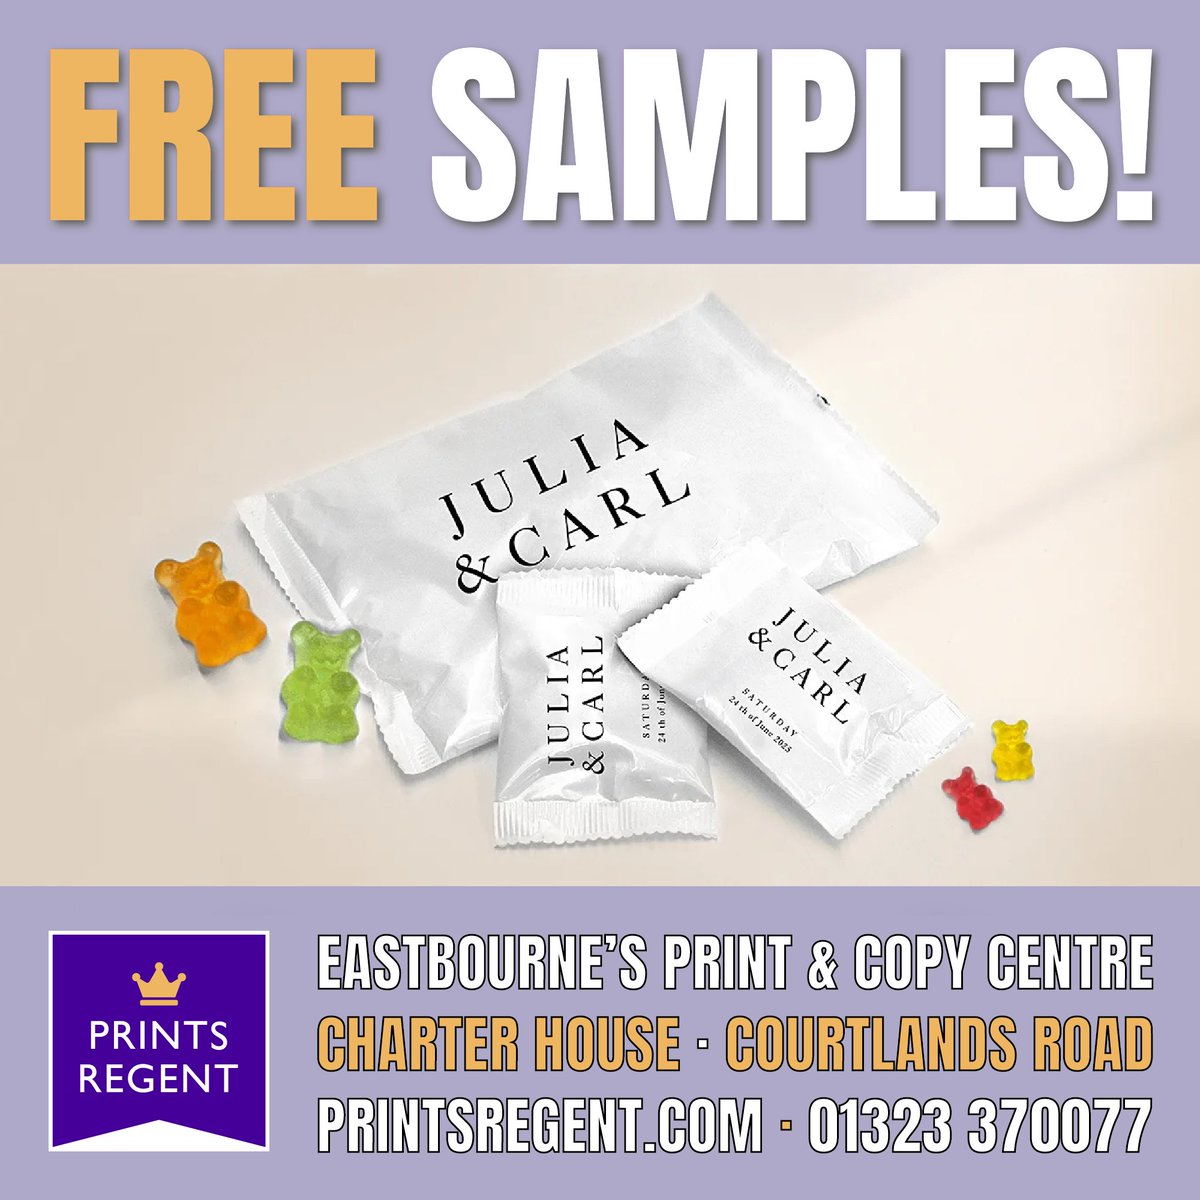 🔔 Our branded wine gums make for wonderful #weddingfavours as shown. This week we are giving away free sample packs of wine gums, while stocks last. All you need to do is pop along to our Eastbourne office and say 'hello'. Spread the word! 📣 #branding #merchandise #eastbourne